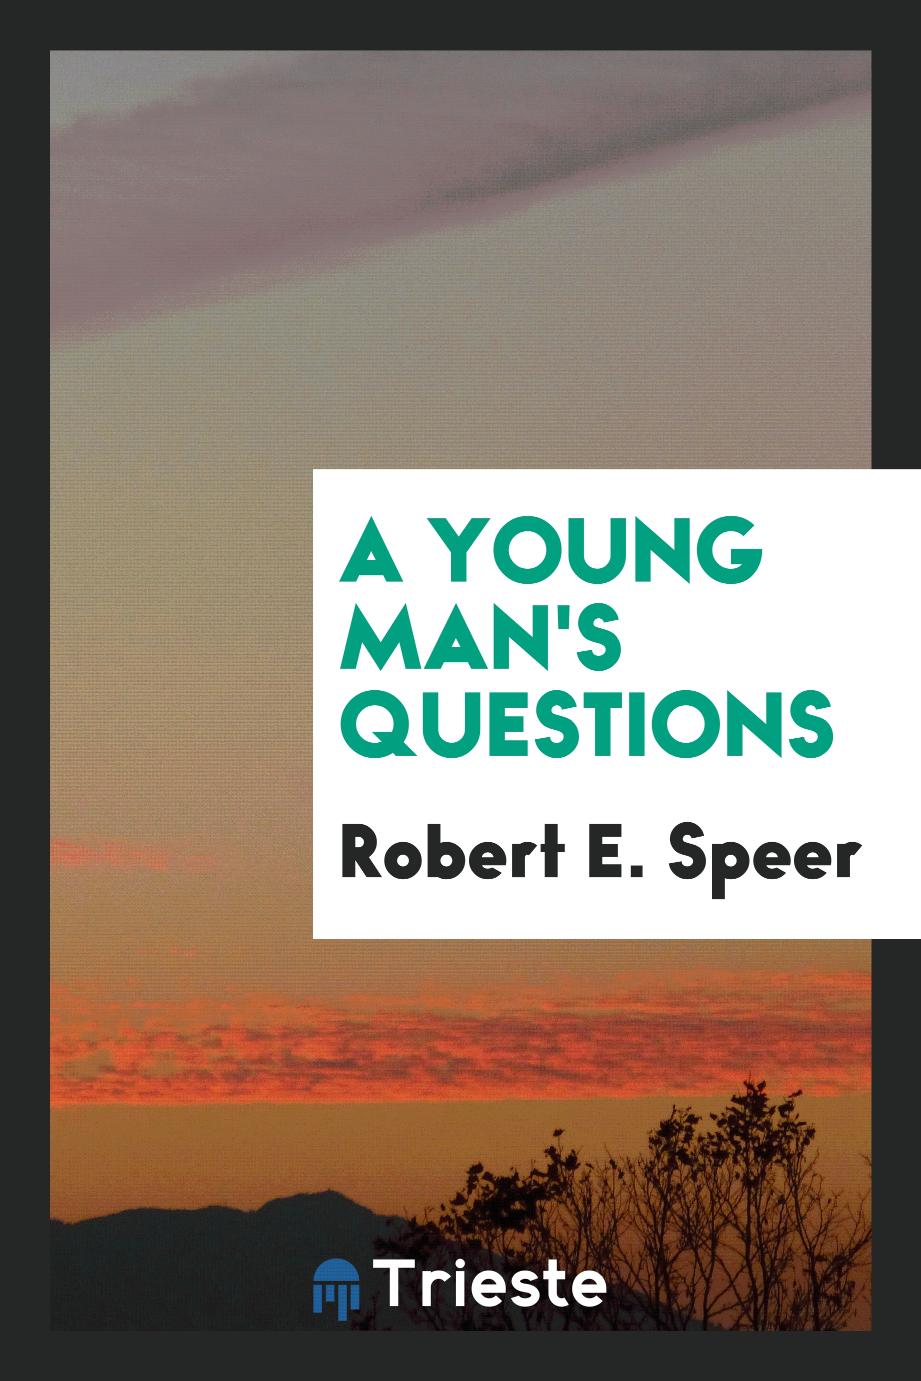 A young man's questions